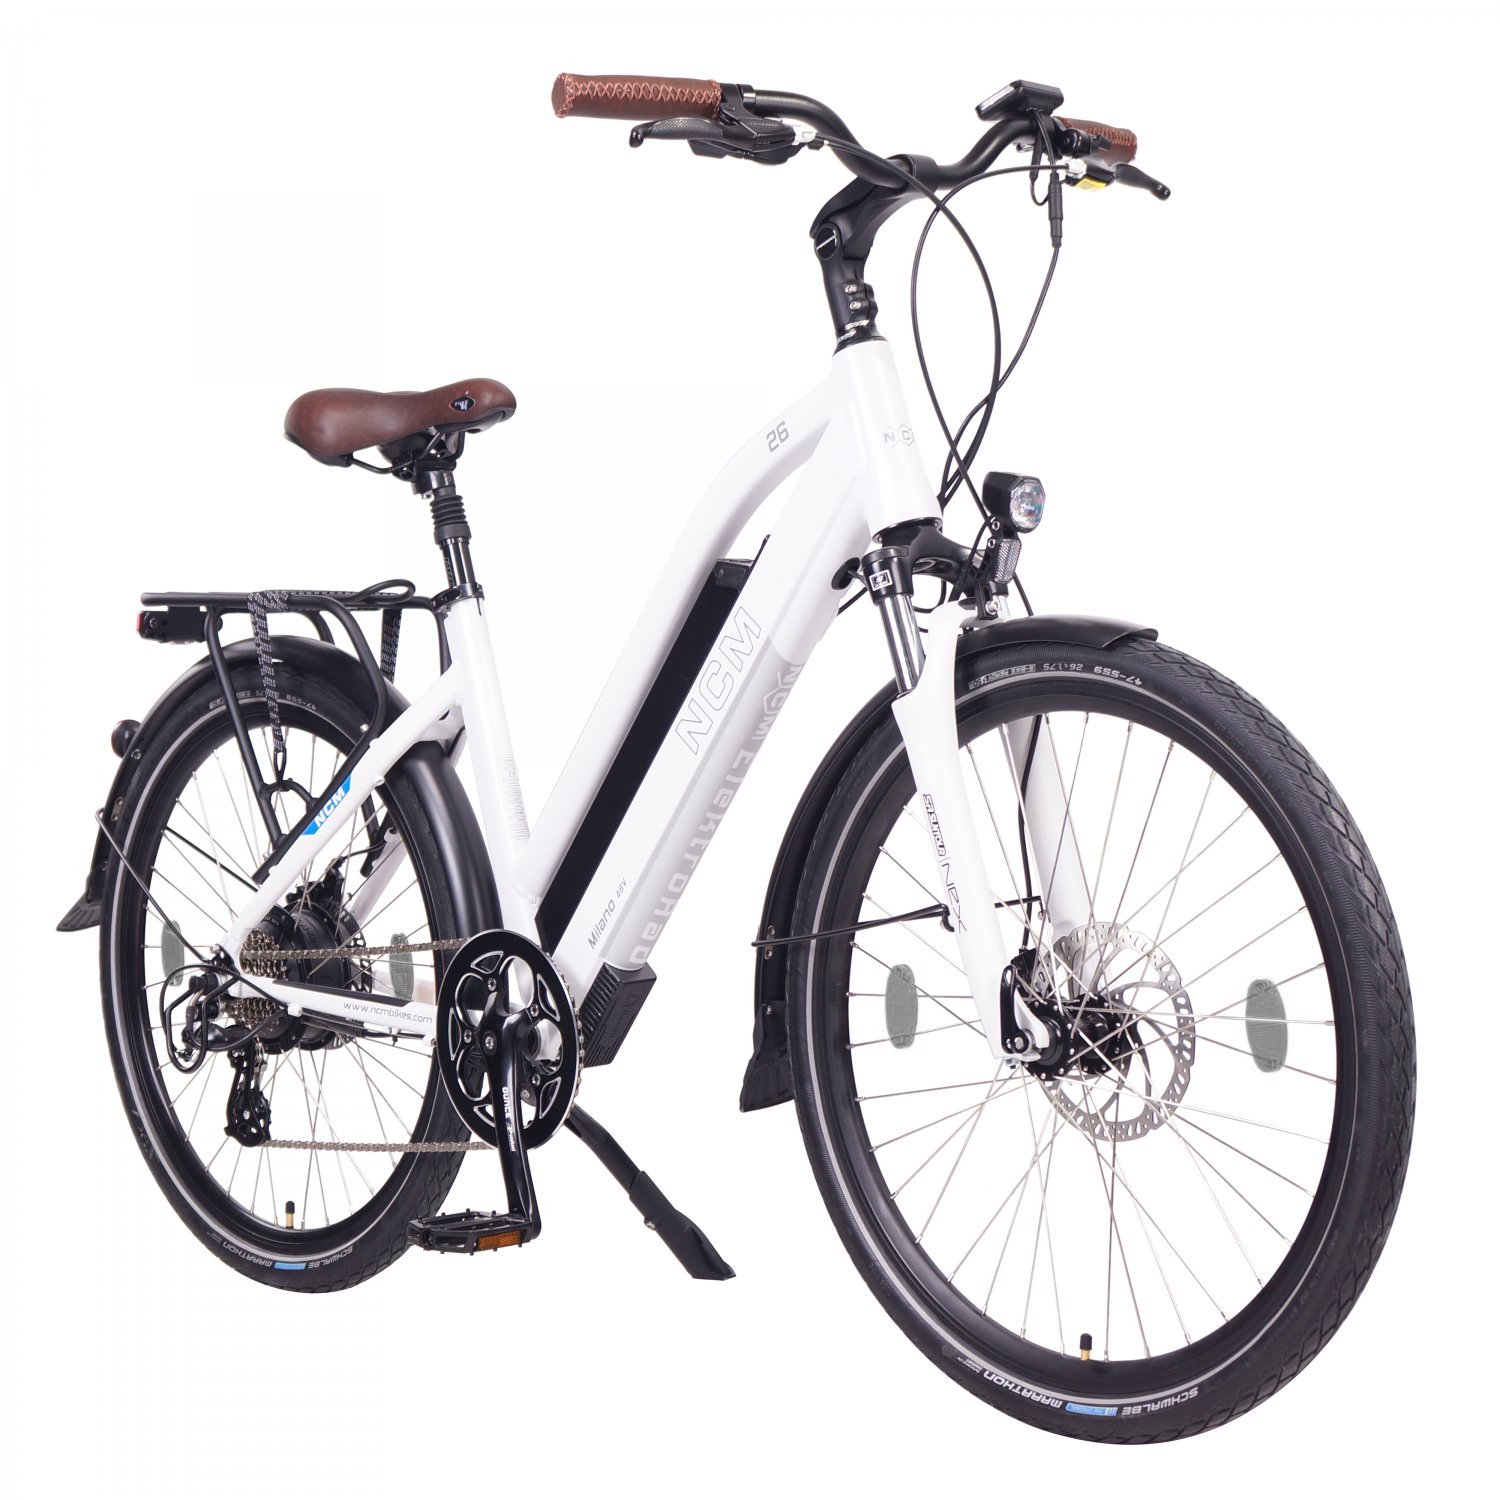 ncm moscow ebike review